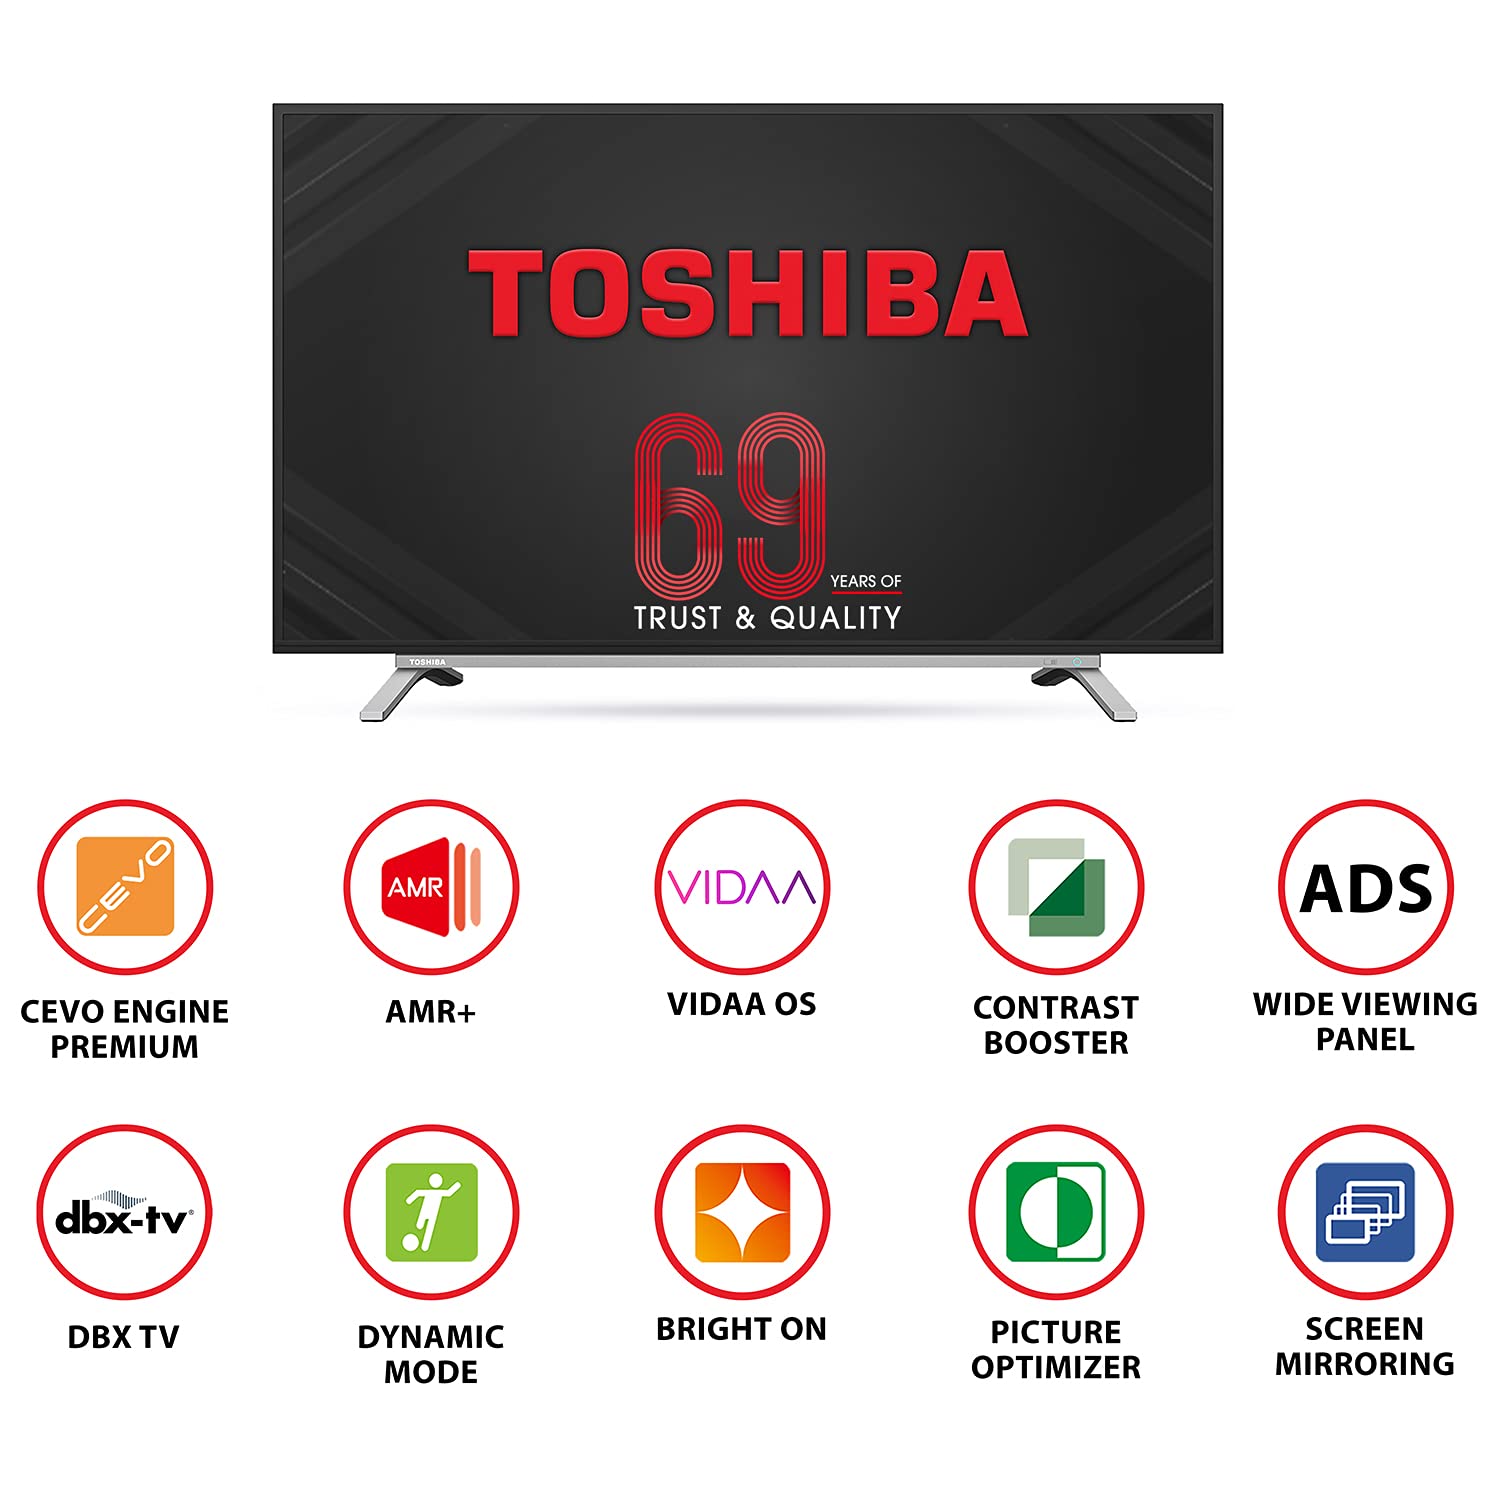 Amazon Sale: The best deal on Toshiba's 43-inch Smart TV, up to 17 thousand discount in exclusive offers on Amazon